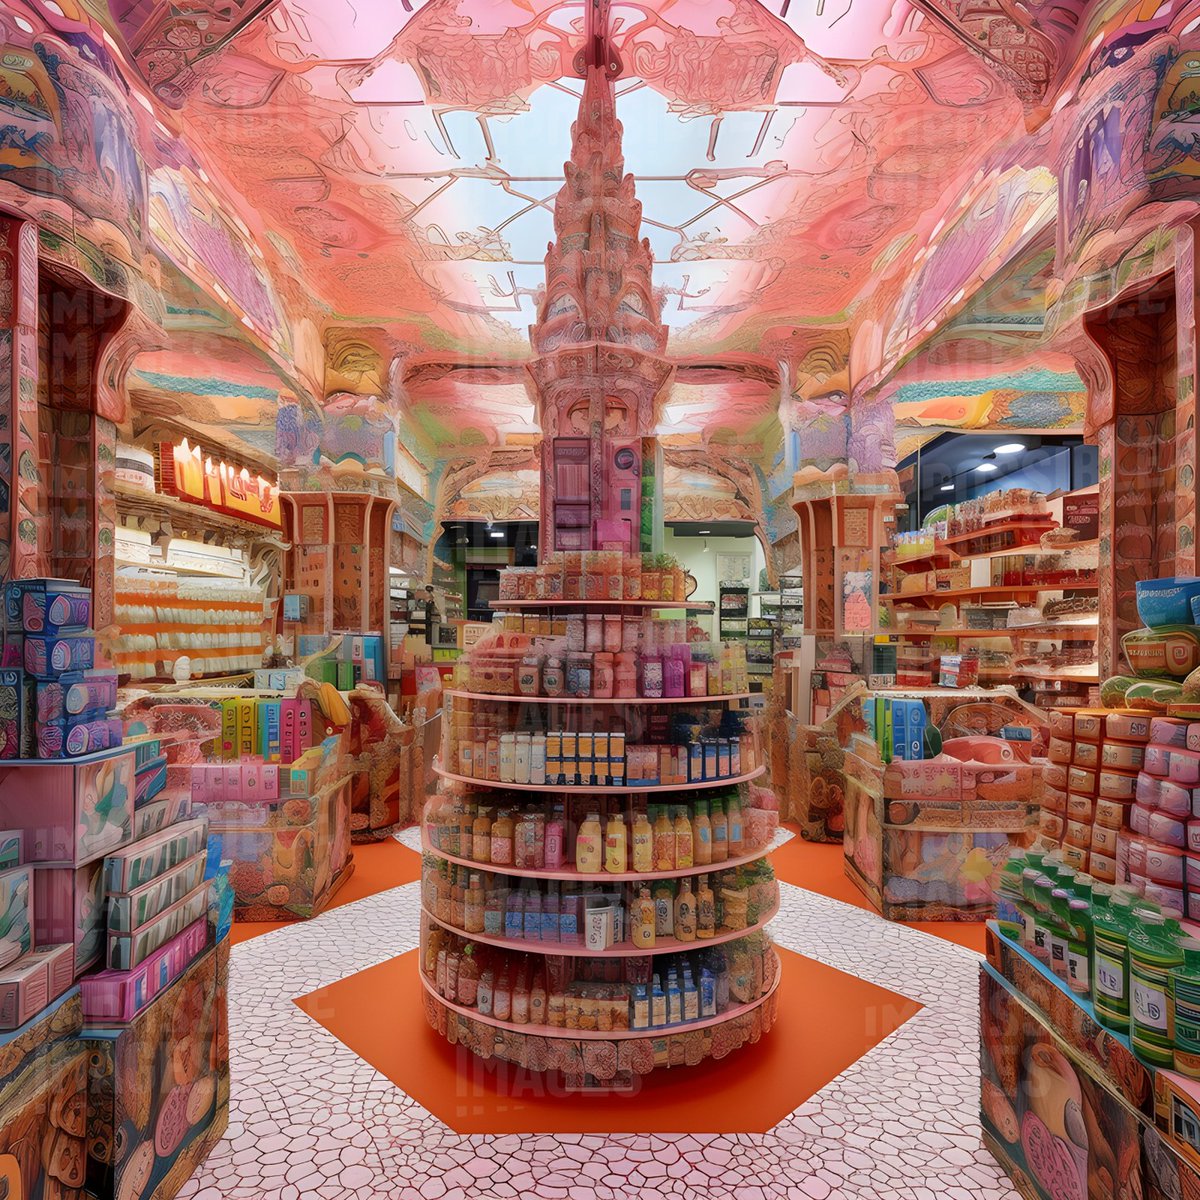 An ornate Supermarket 

— 

#impossibleimages #impossible_img #impossibleai #aiart #ai #midjourney #midjourneyart  #aiphotography #photography #ornate #design #color #store #storedesign #pink #coquette #cute